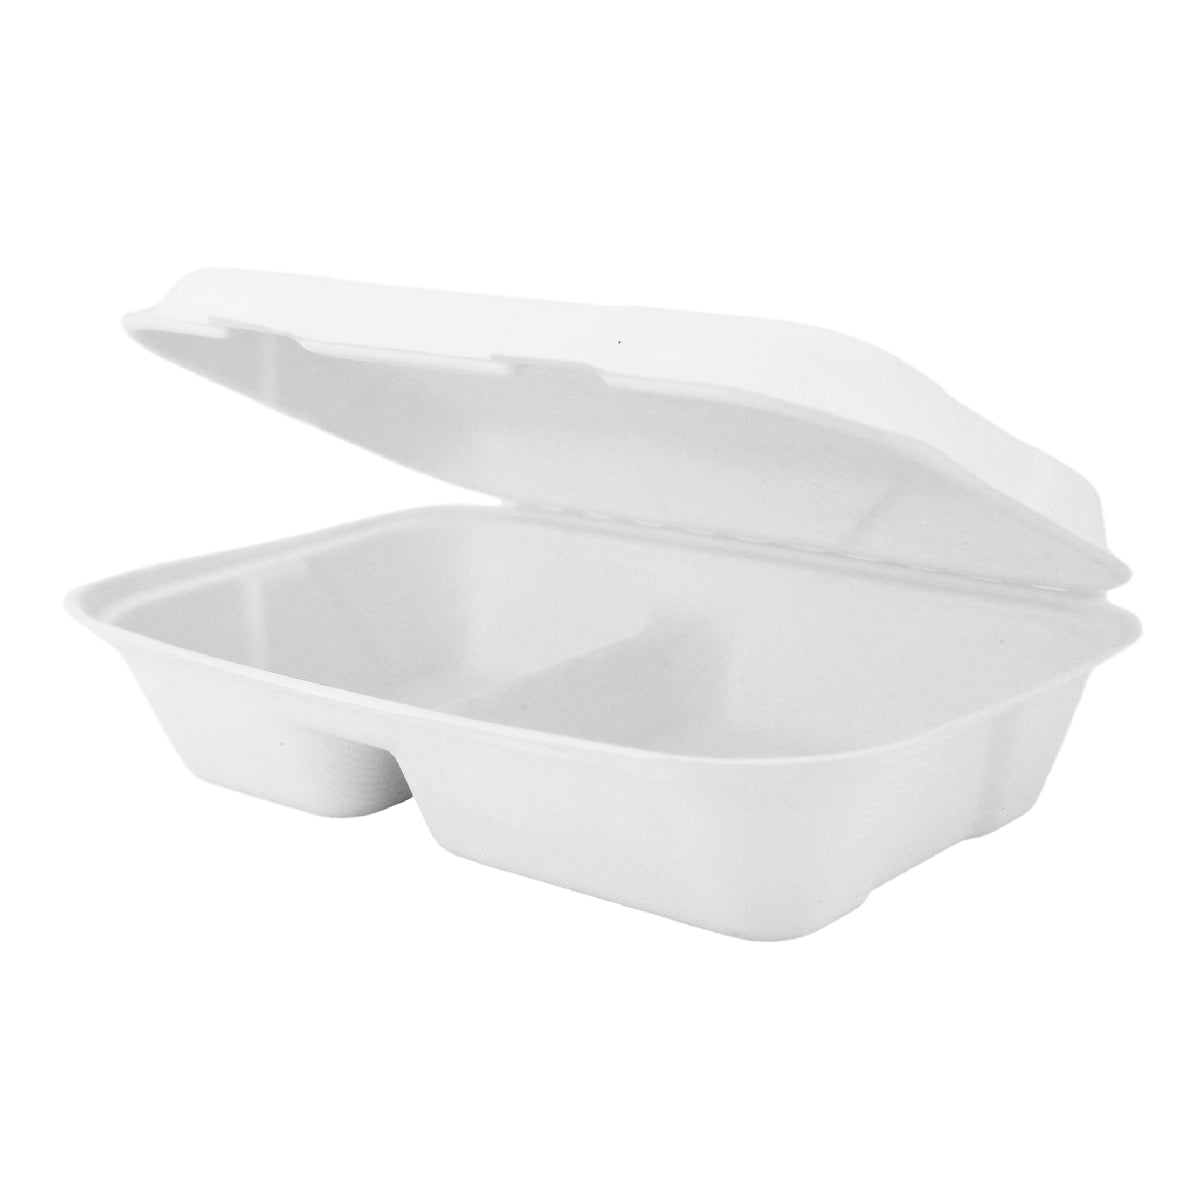 Compostable 9 x 6 inch 2-Compartment Molded Fiber Hinged Containers White